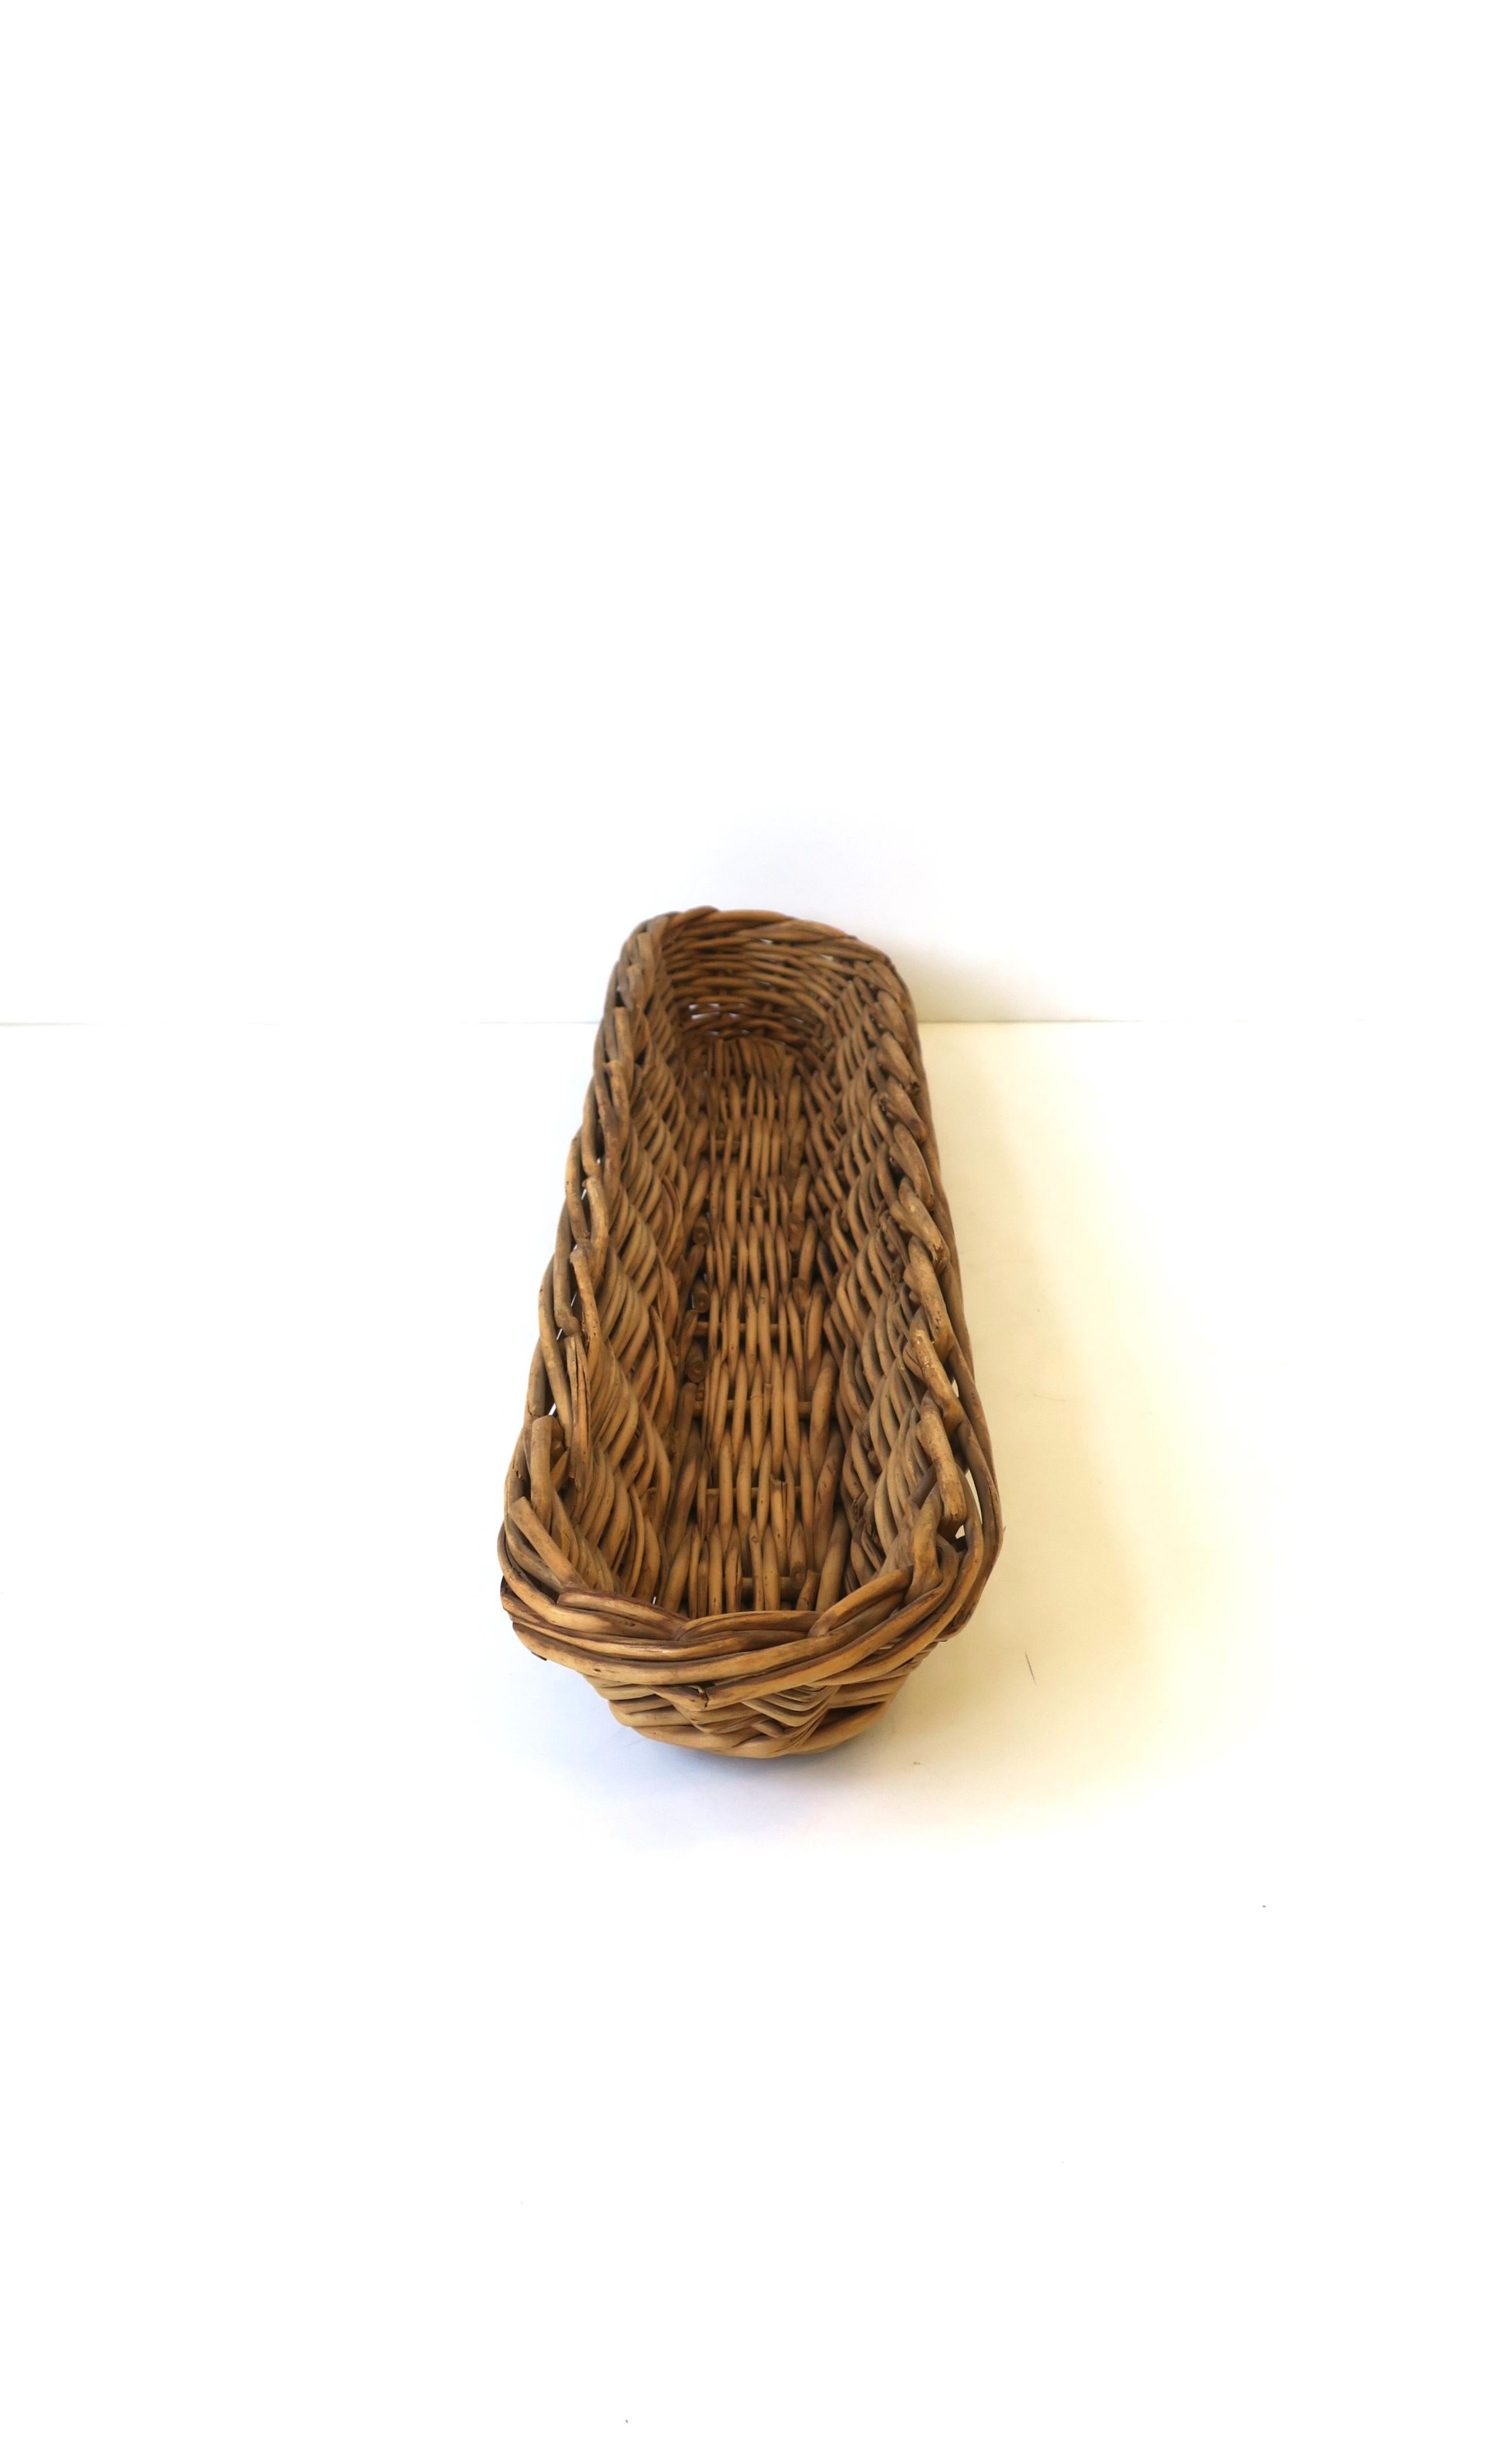 American Classical Wicker Basket For Sale